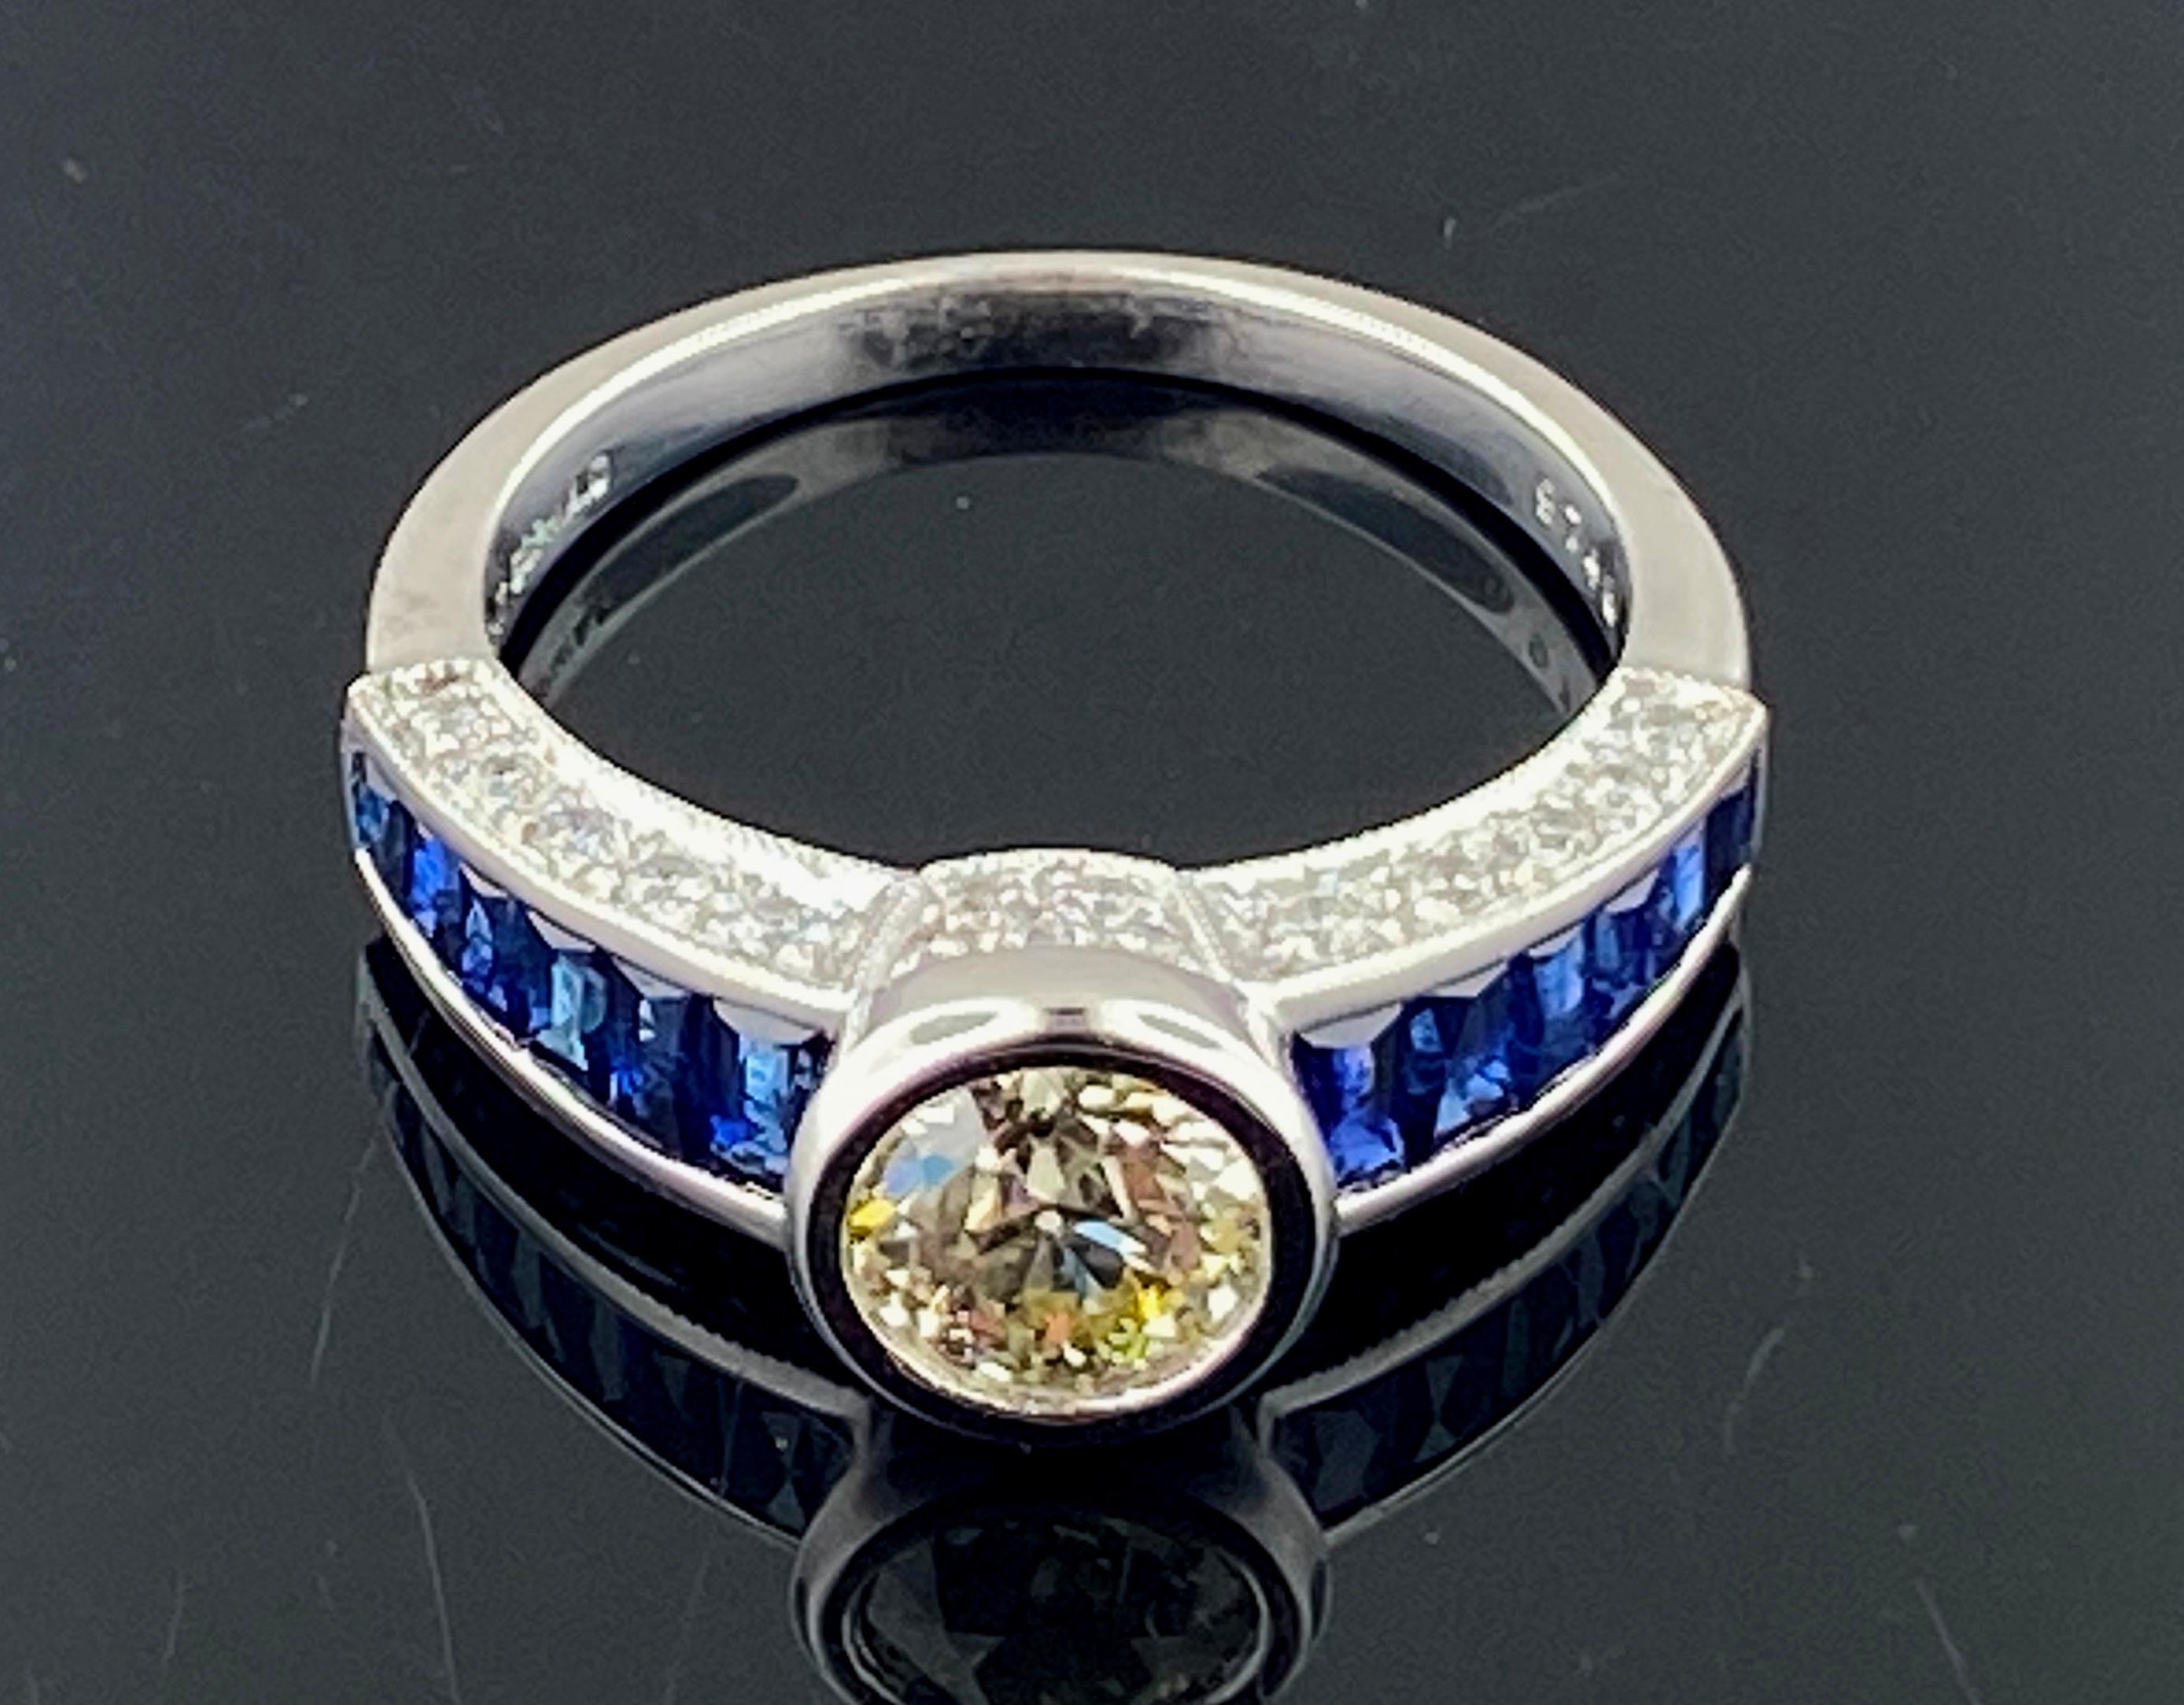 Set in Platinum, weighing 6.63 grams, is an 0.75 carat Old European Cut center diamond, Color: N-O, Clarity: VS-1, accented on the sides with 12 French Cut Blue Sapphires weighing 1.15 carats and 31 Round Brilliant Cut diamonds weighing 0.30 carats.